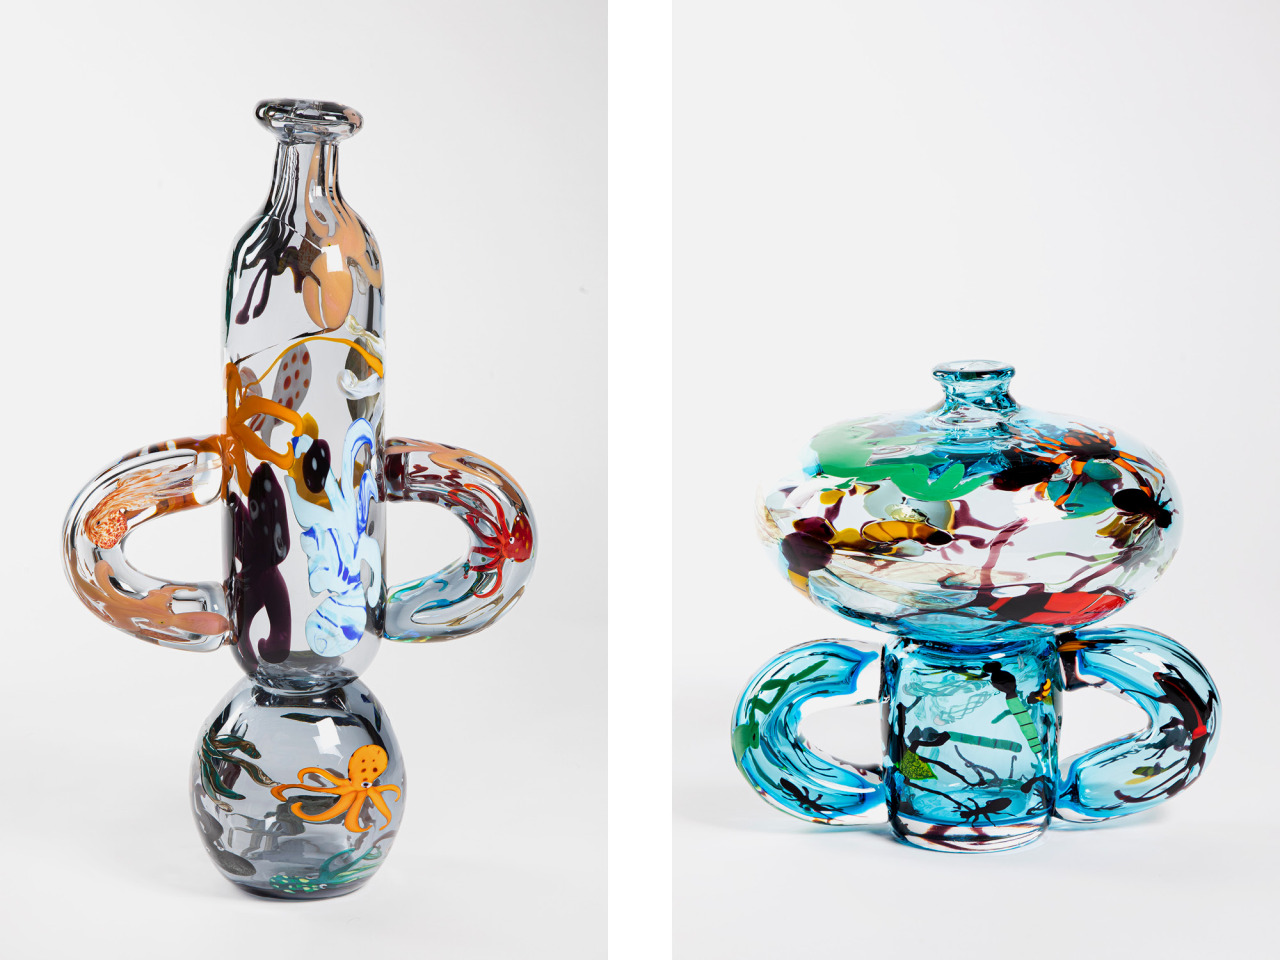 Animalier
for Dolce & Gabbana CasaAnimalier, a new collection of Murano glass vases for the Gen D project by Dolce & Gabbana Casa, curated by Federica Sala.
Made in collaboration with Fornace Mian, Murano & Bubacco Bros.
With Animalier we mean, both...